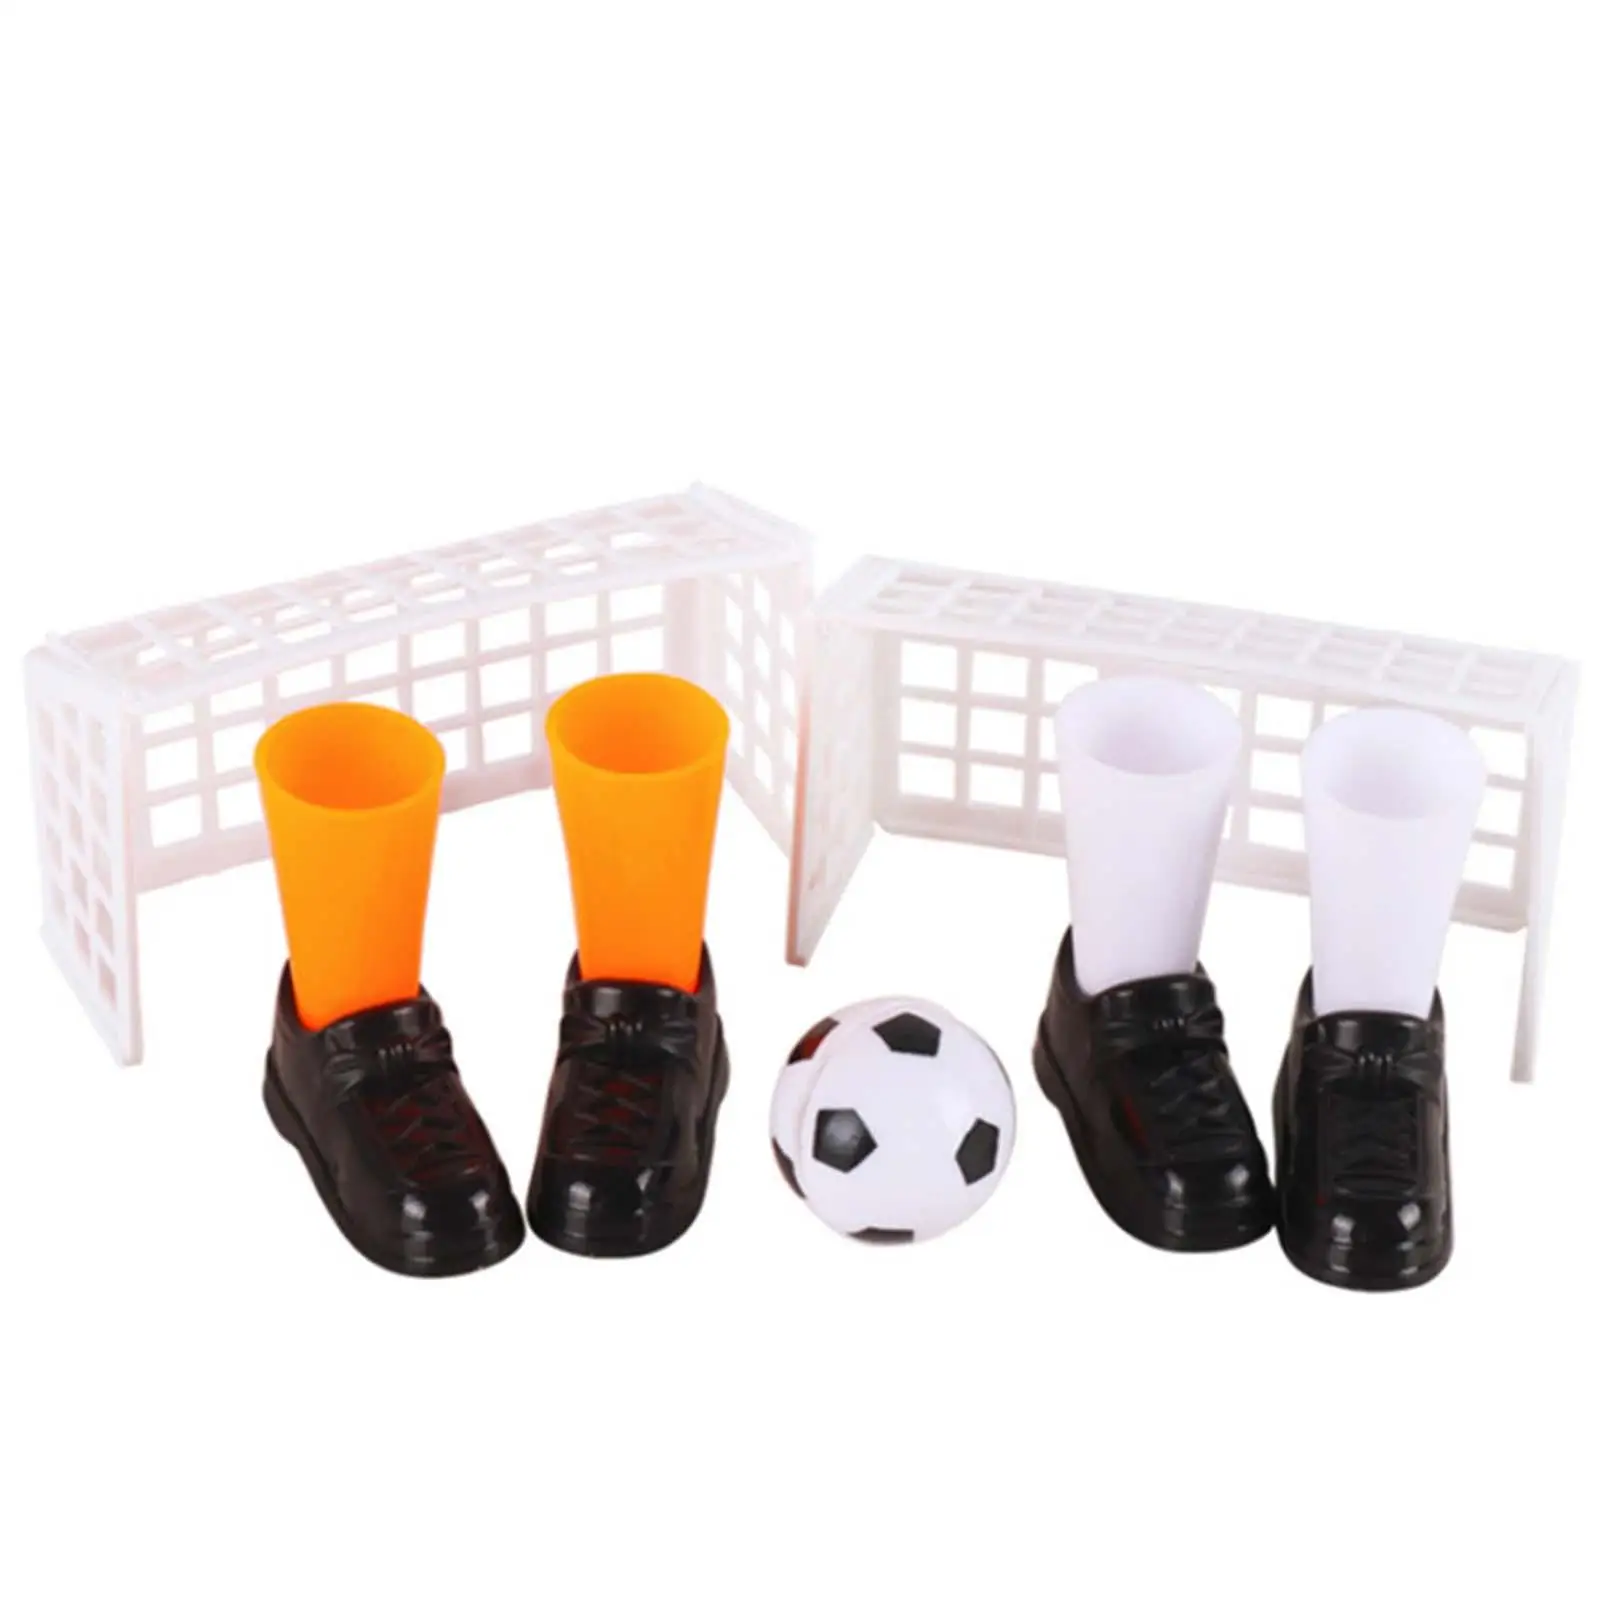 Set of Table Soccer Football Game Interactive Toy Sports Mini Tabletop Football Soccer Finger Games for Tabletop Boys Family